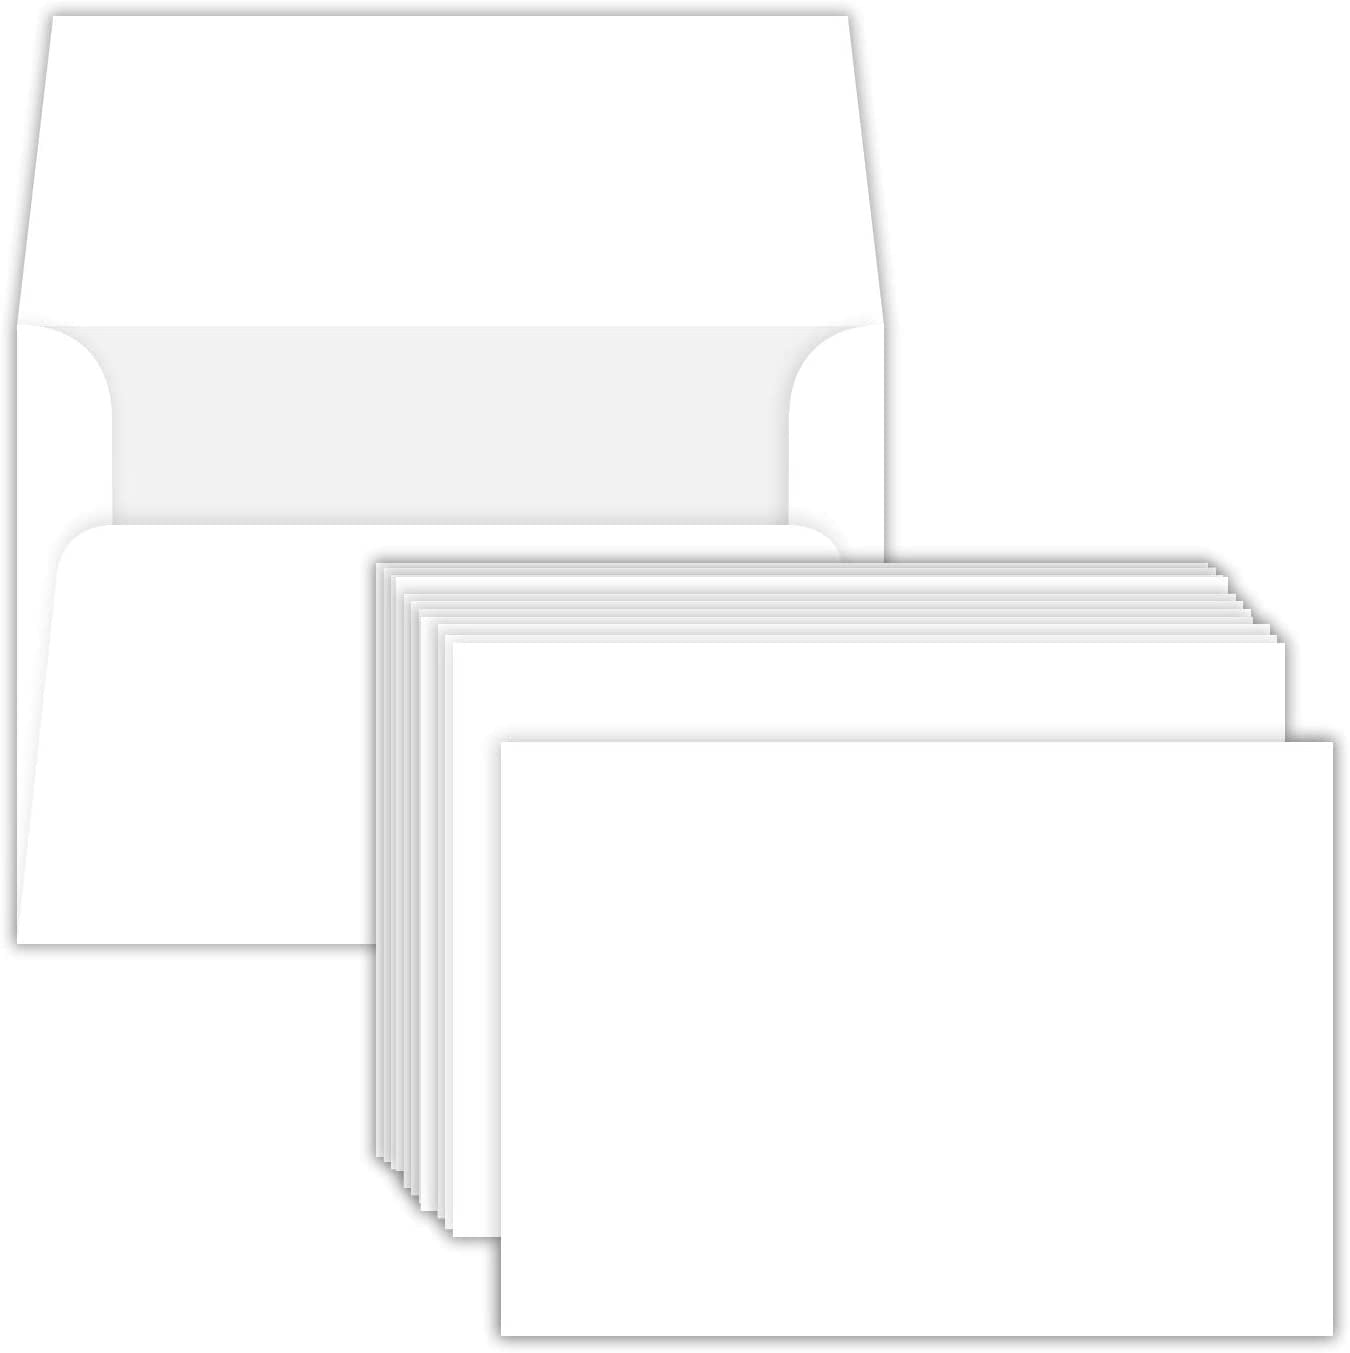 Heavyweight Blank White Note Cards and Envelopes | 4 1/4” X 5 1/2” Inches  (A2) | 50 Cards and 50 Envelopes | Not a Fold Over Card